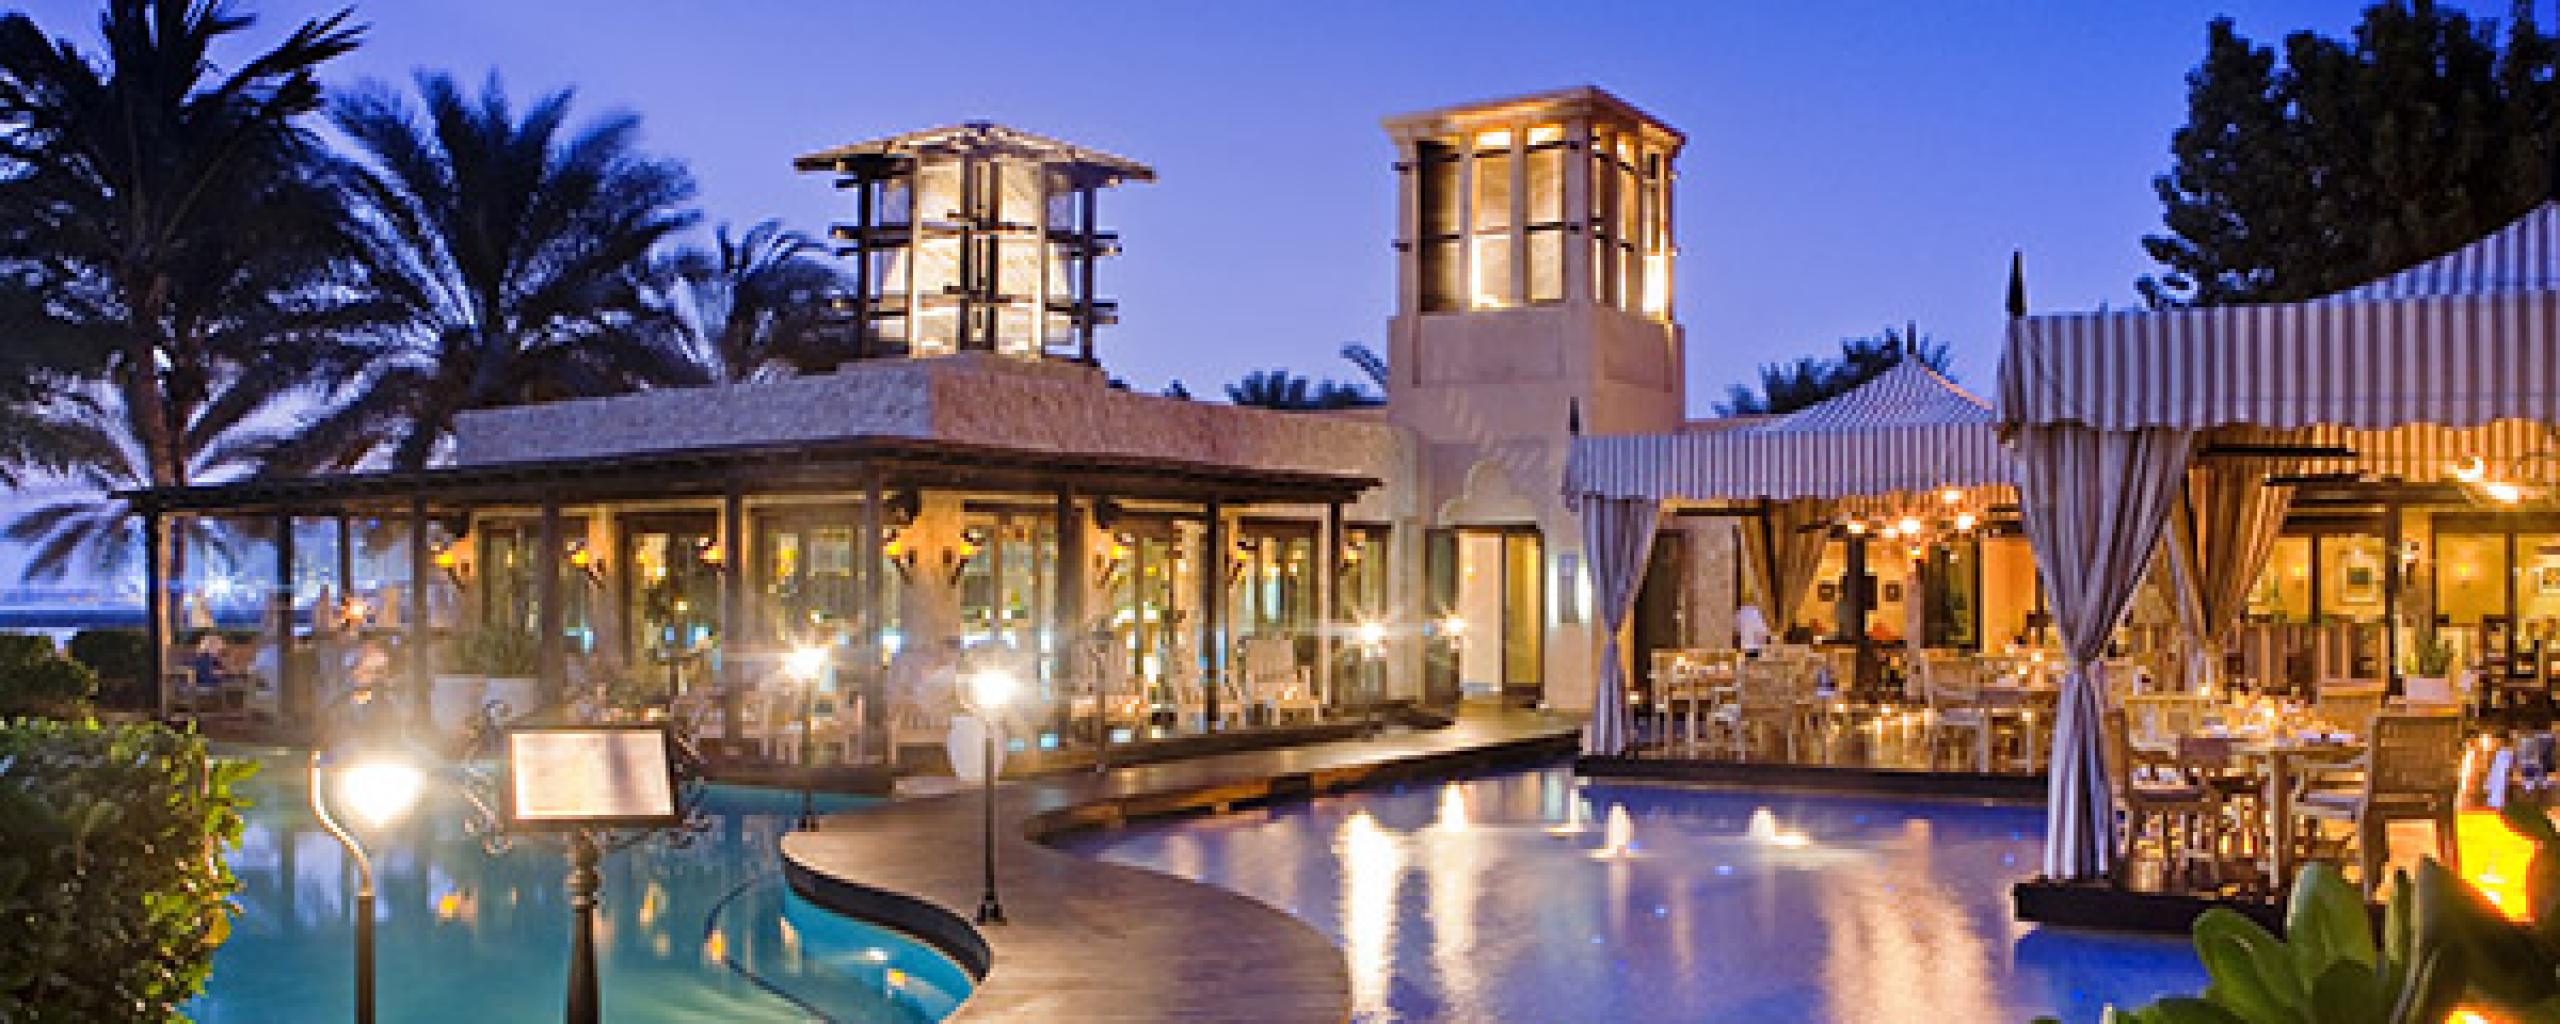 One & Only Royale Mirage - Dubai